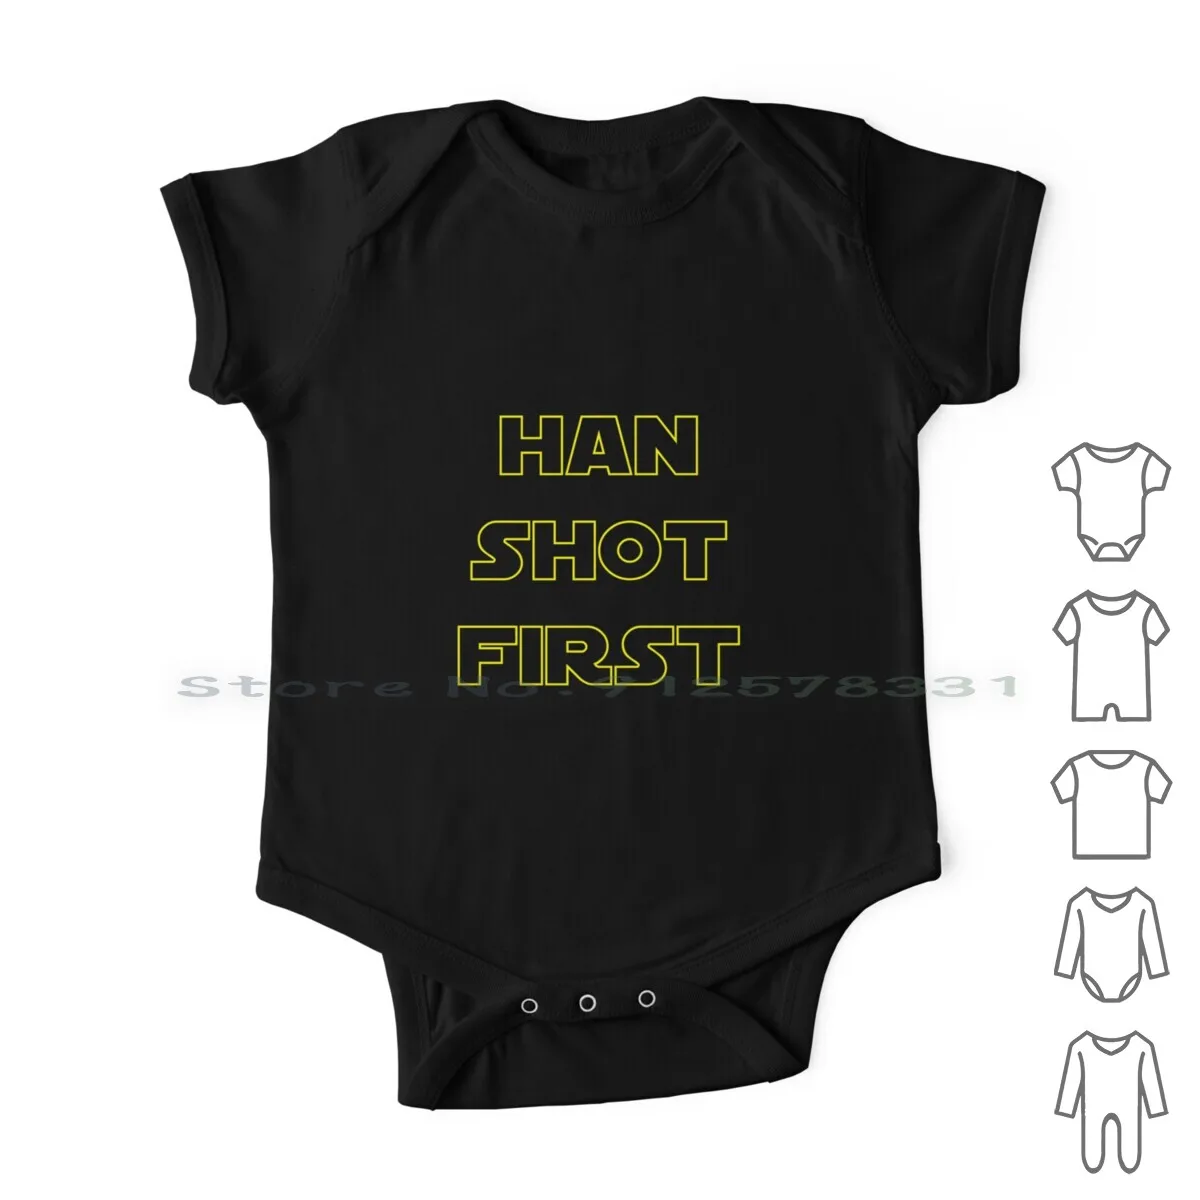 Han Shot First Newborn Baby Clothes Rompers Cotton Jumpsuits Lucasarts Lucasfilm Galaxy Galactic Republic Jedi Lightsaber Light